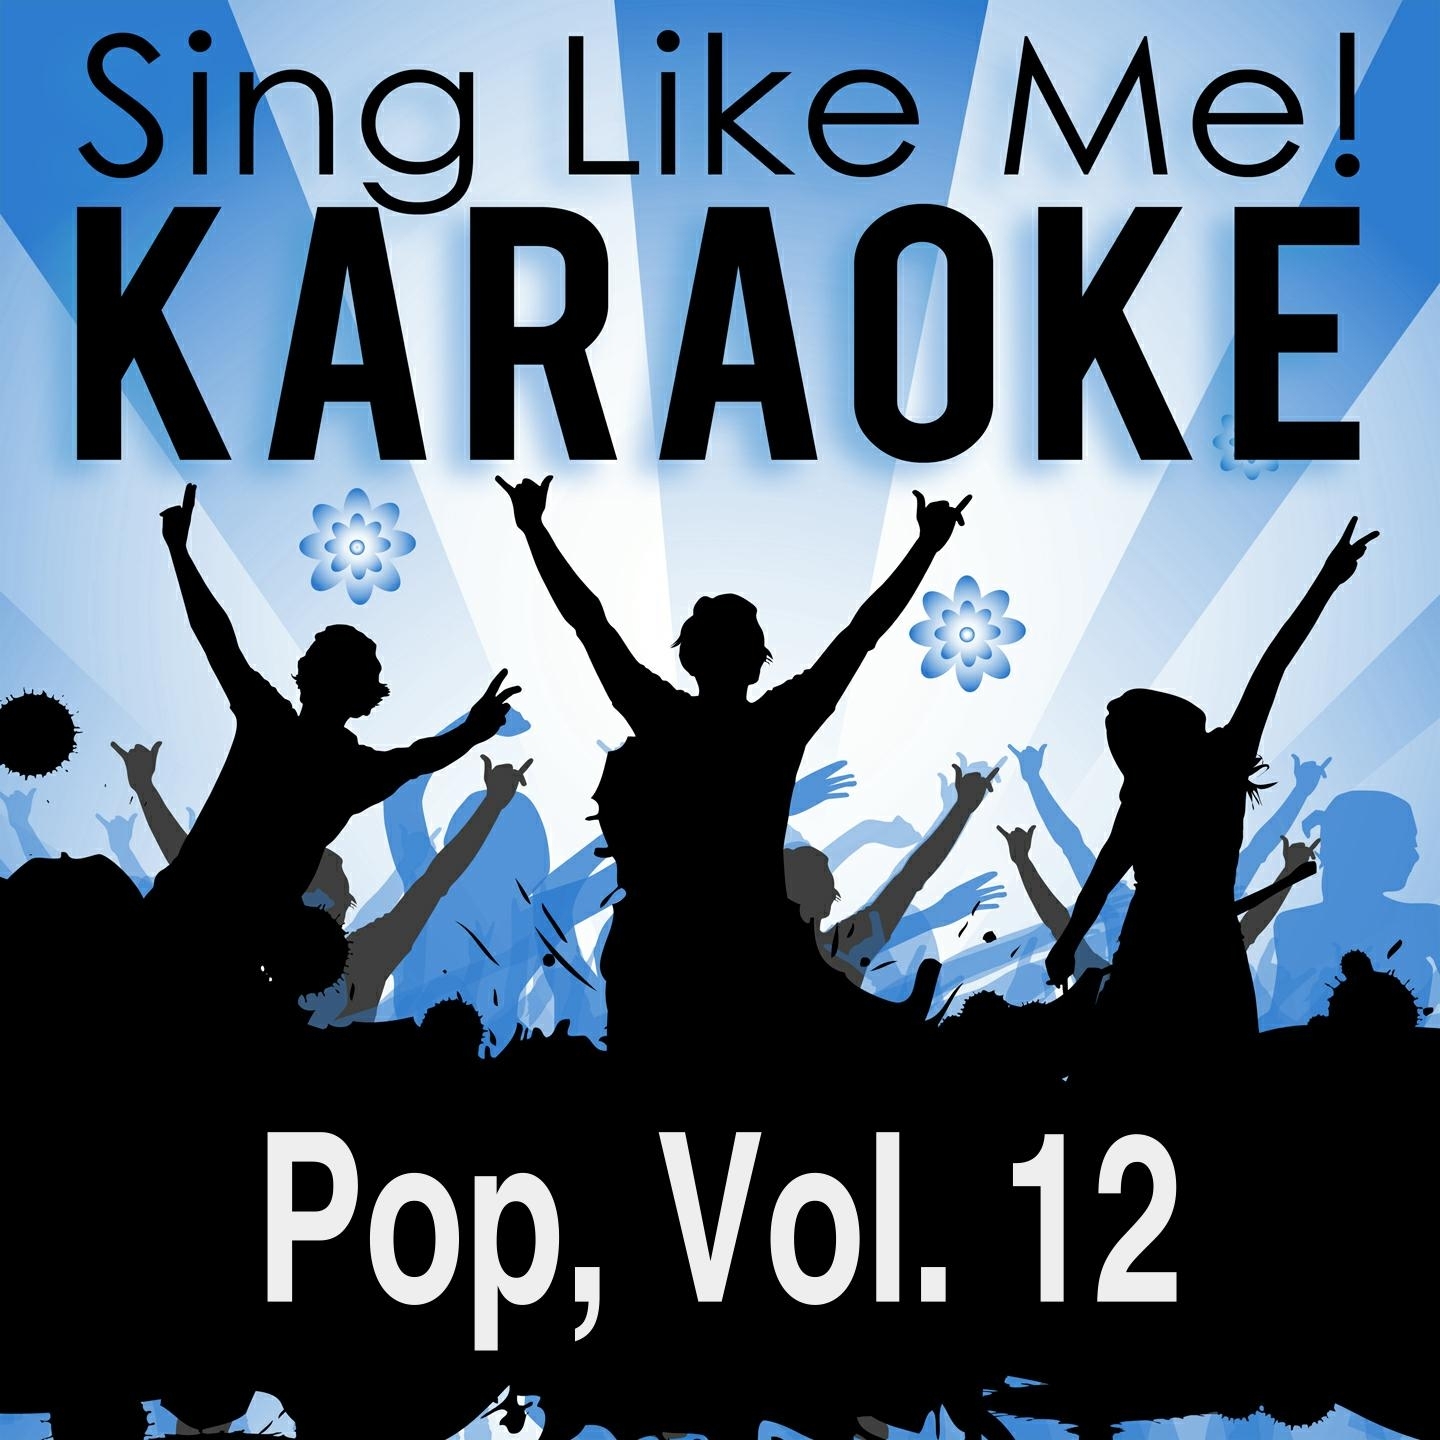 He Don't Love You (Karaoke Version With Guide Melody) (Originally Performed By Human Nature)